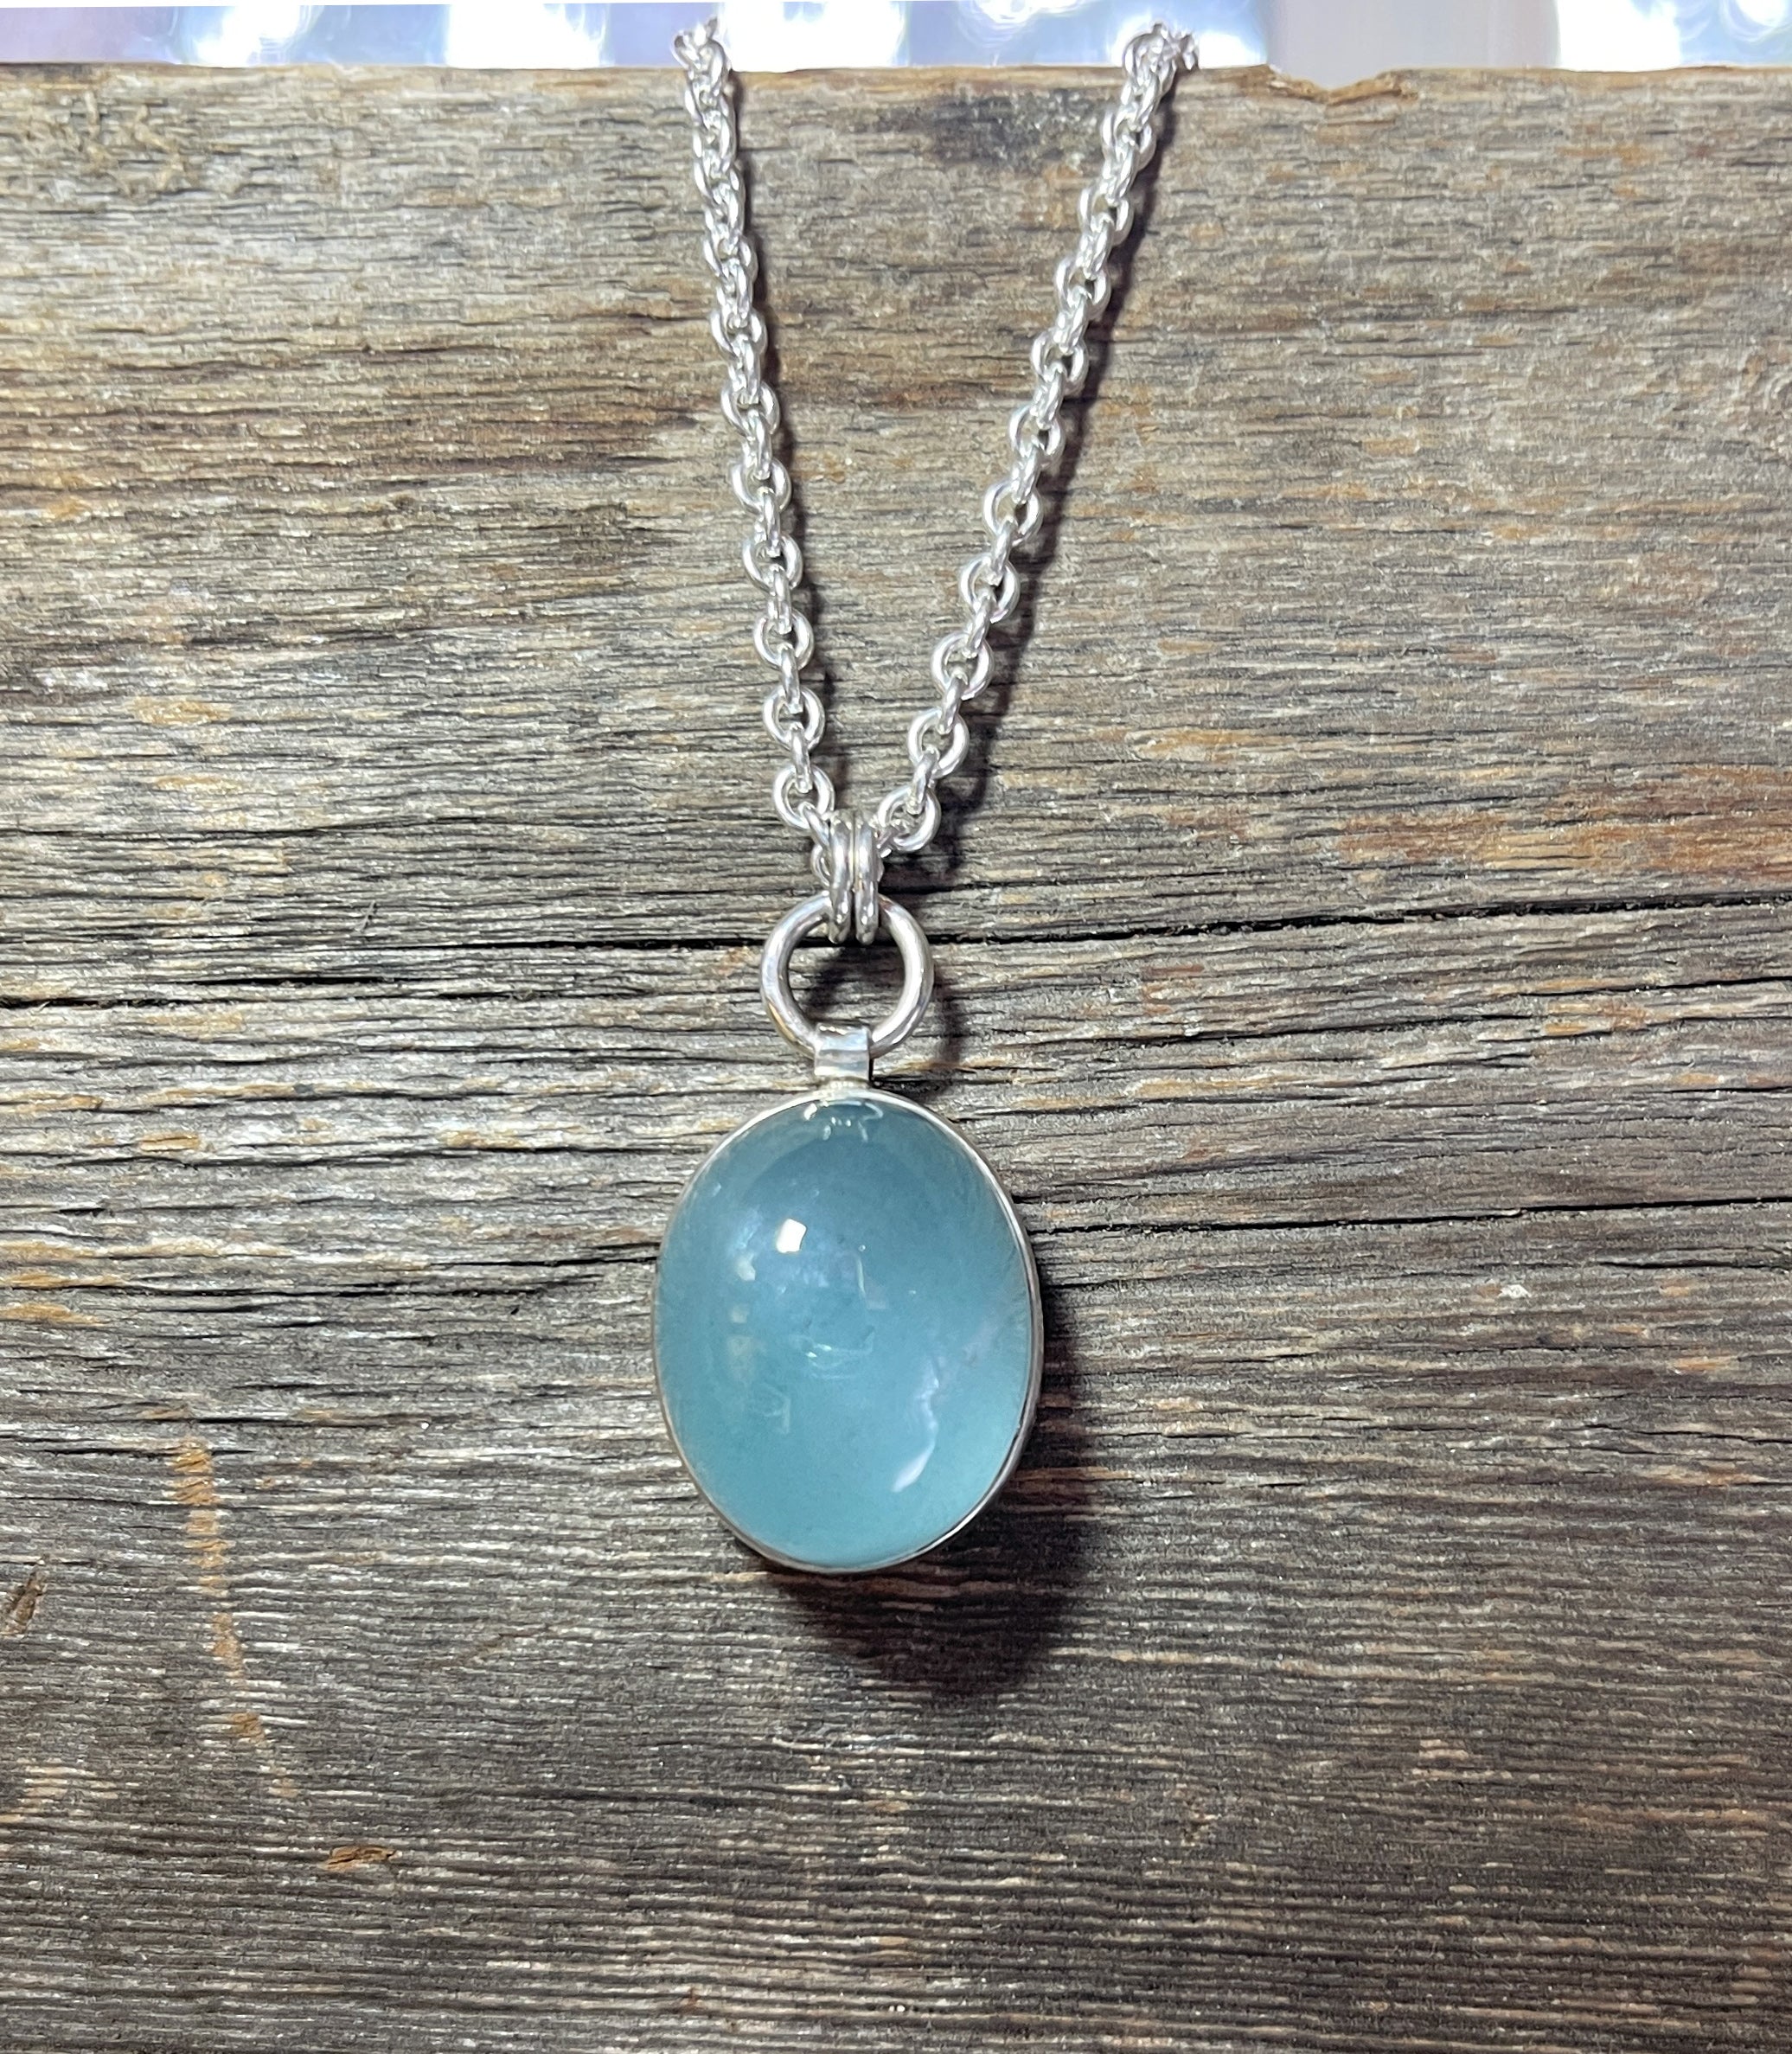 Aquamarine Necklace in Sterling Silver with 28" Long Infinity Chain, Gemstone Necklace on Long Chain, Layering Necklace